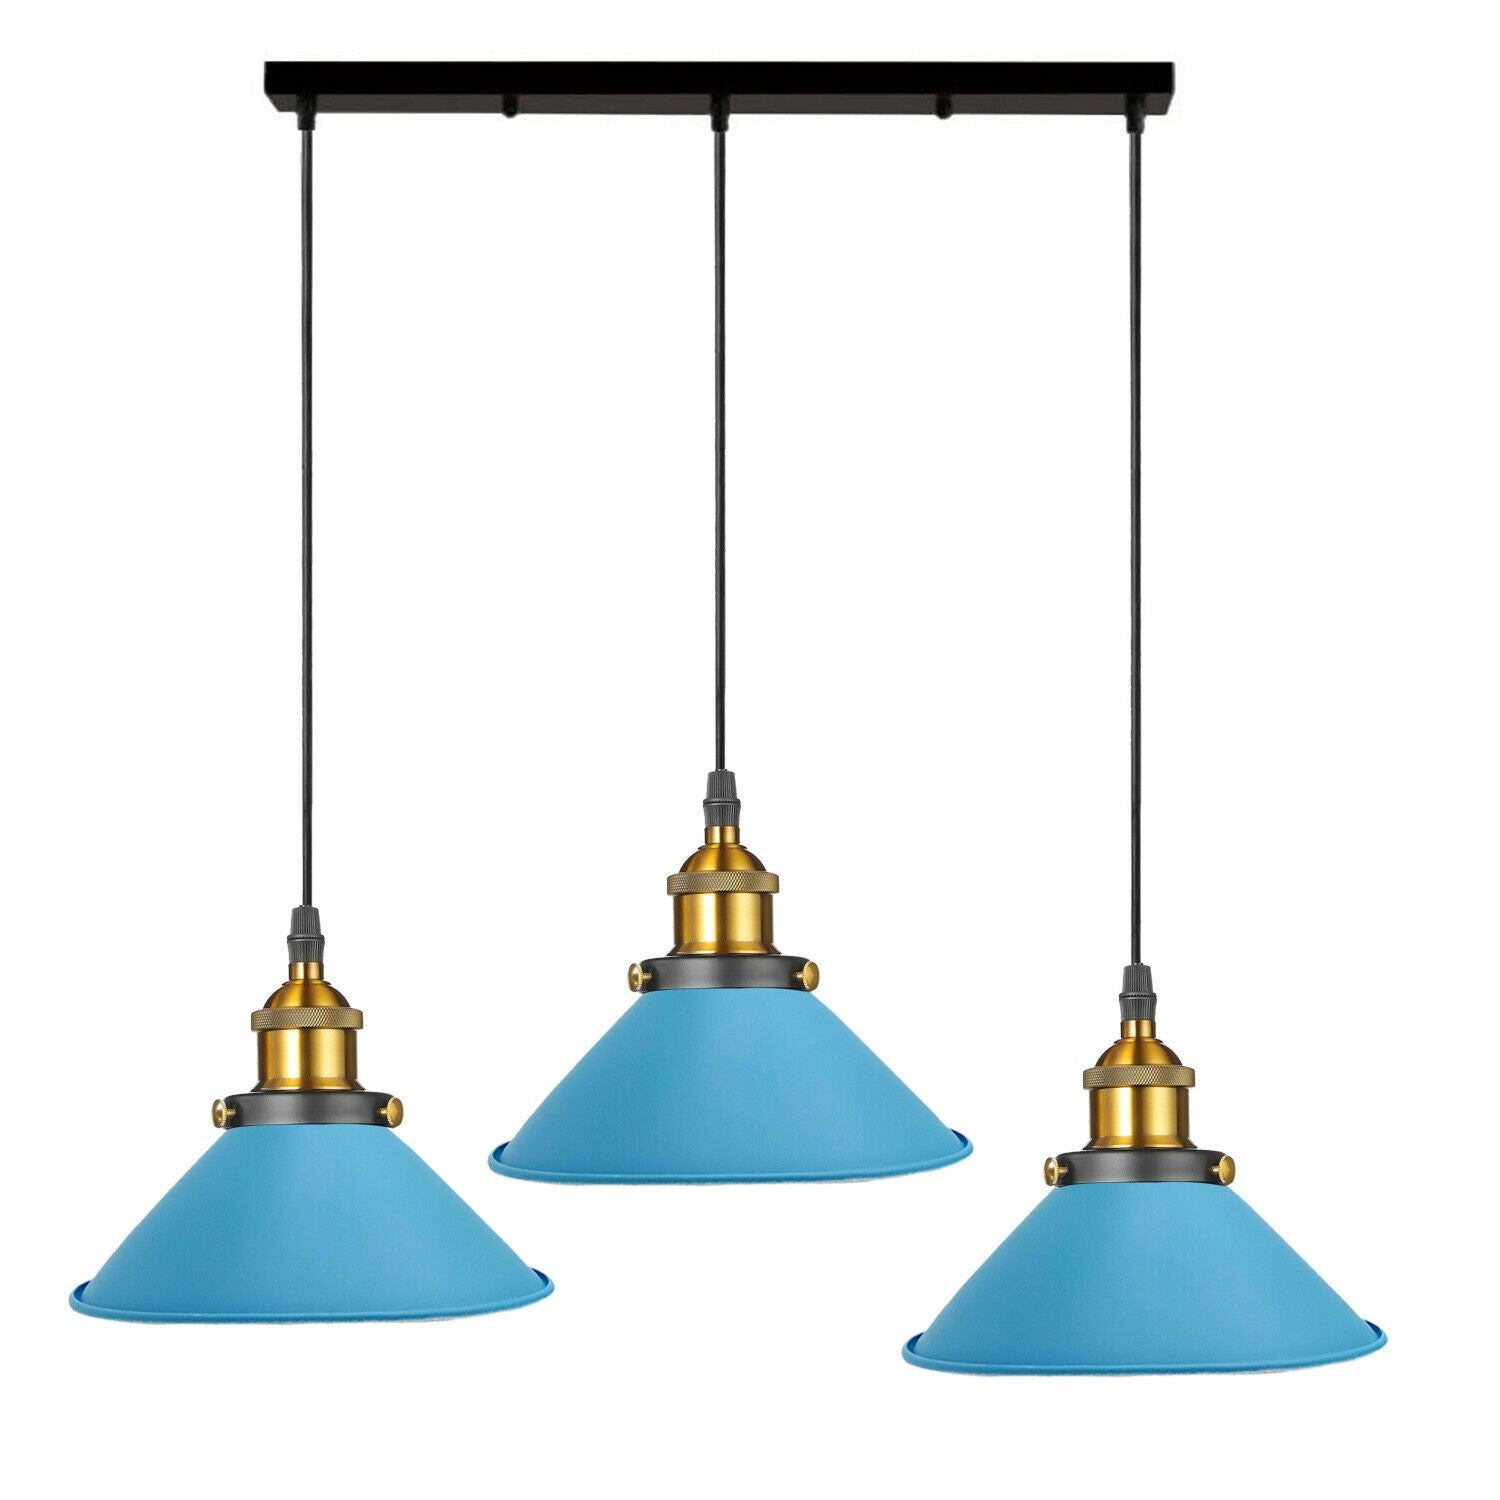  Pendant Light with 3 Heads Cone Style Chandelier